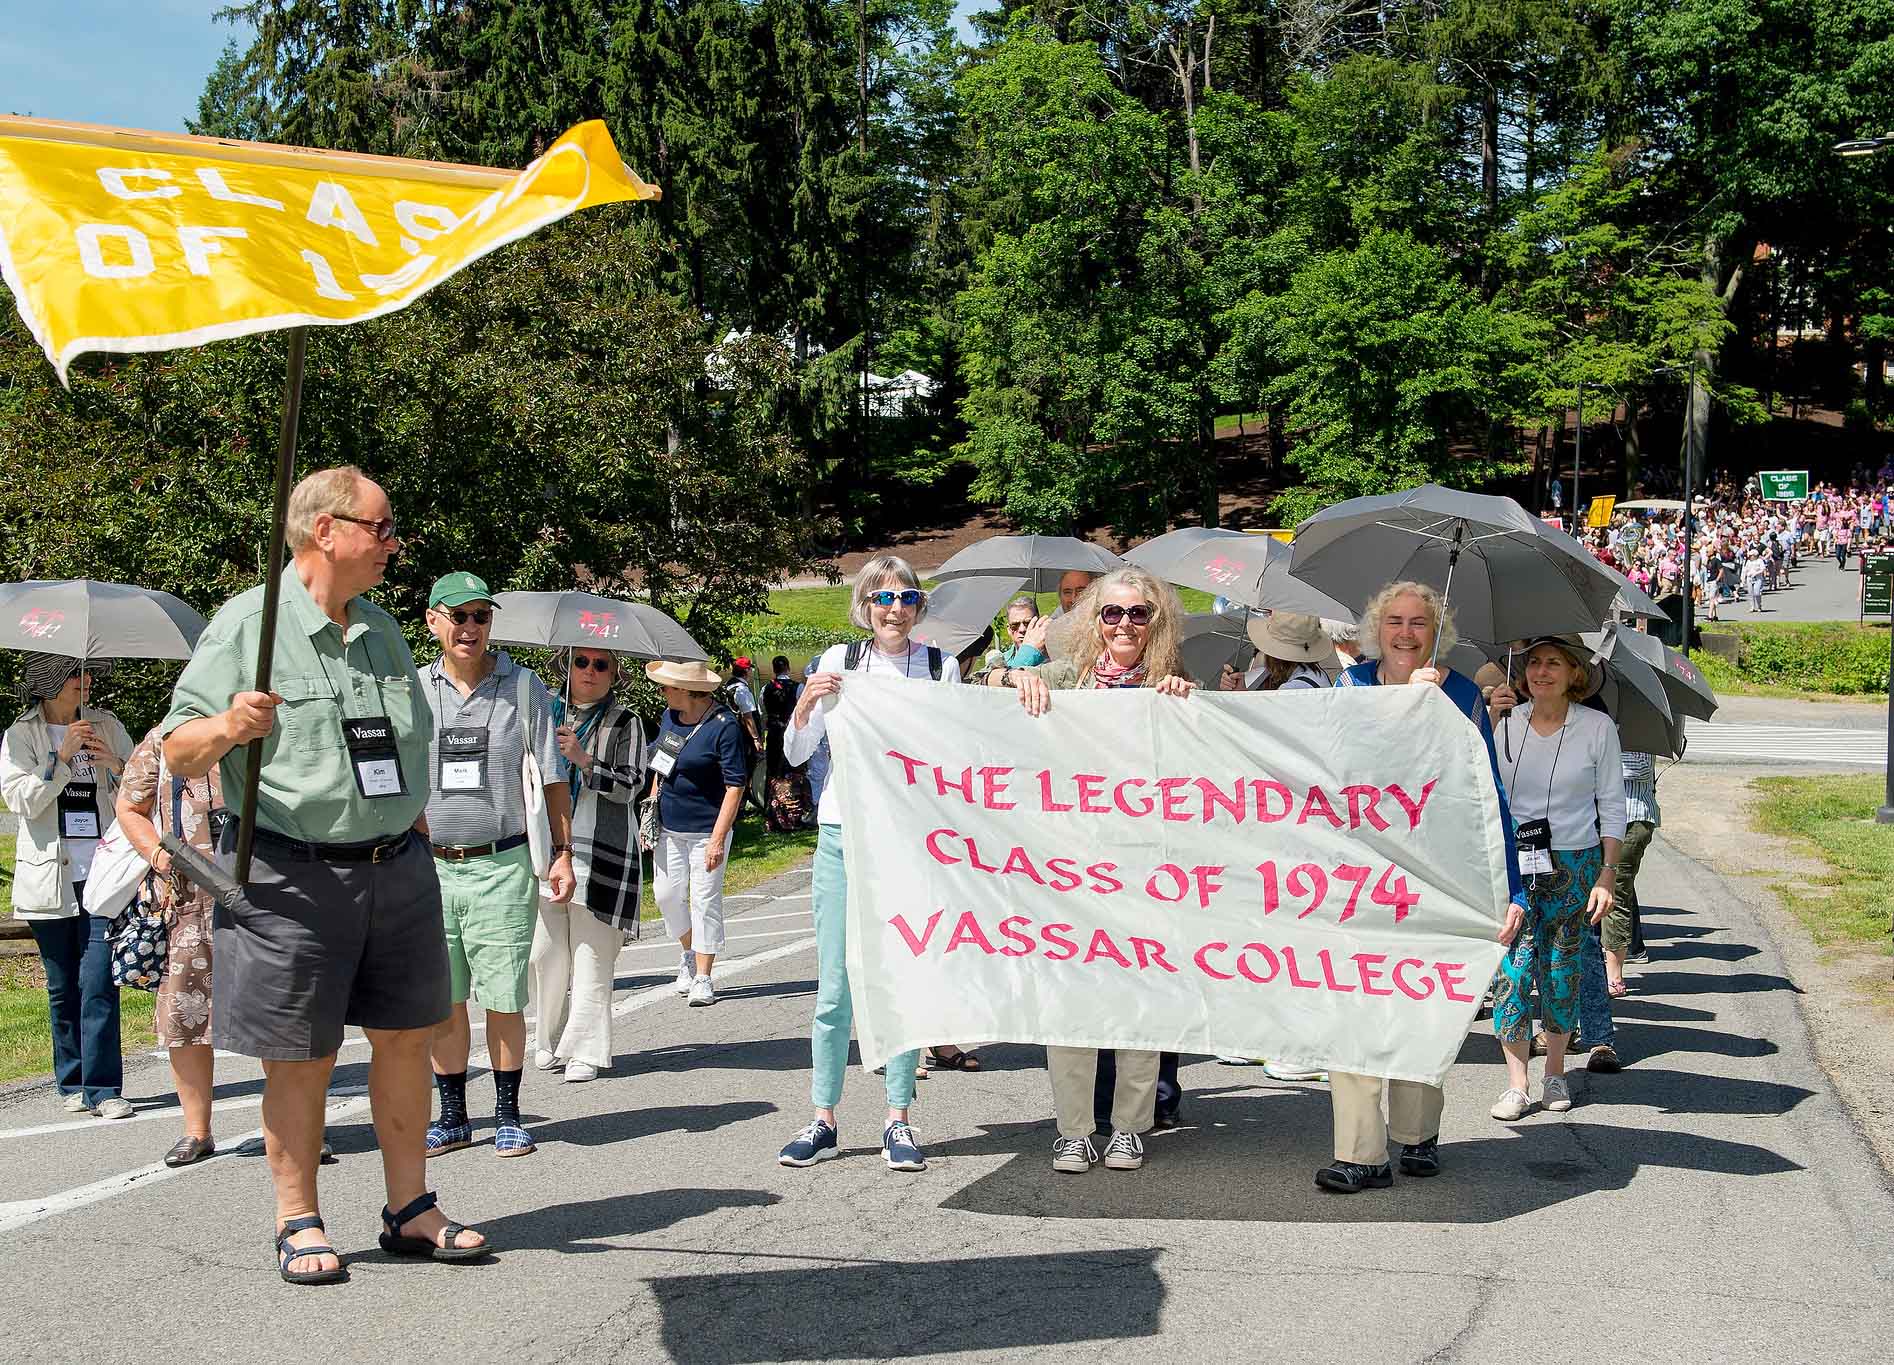 People walking in a group, with some people holding a banner reading The Legendary Class of 1974